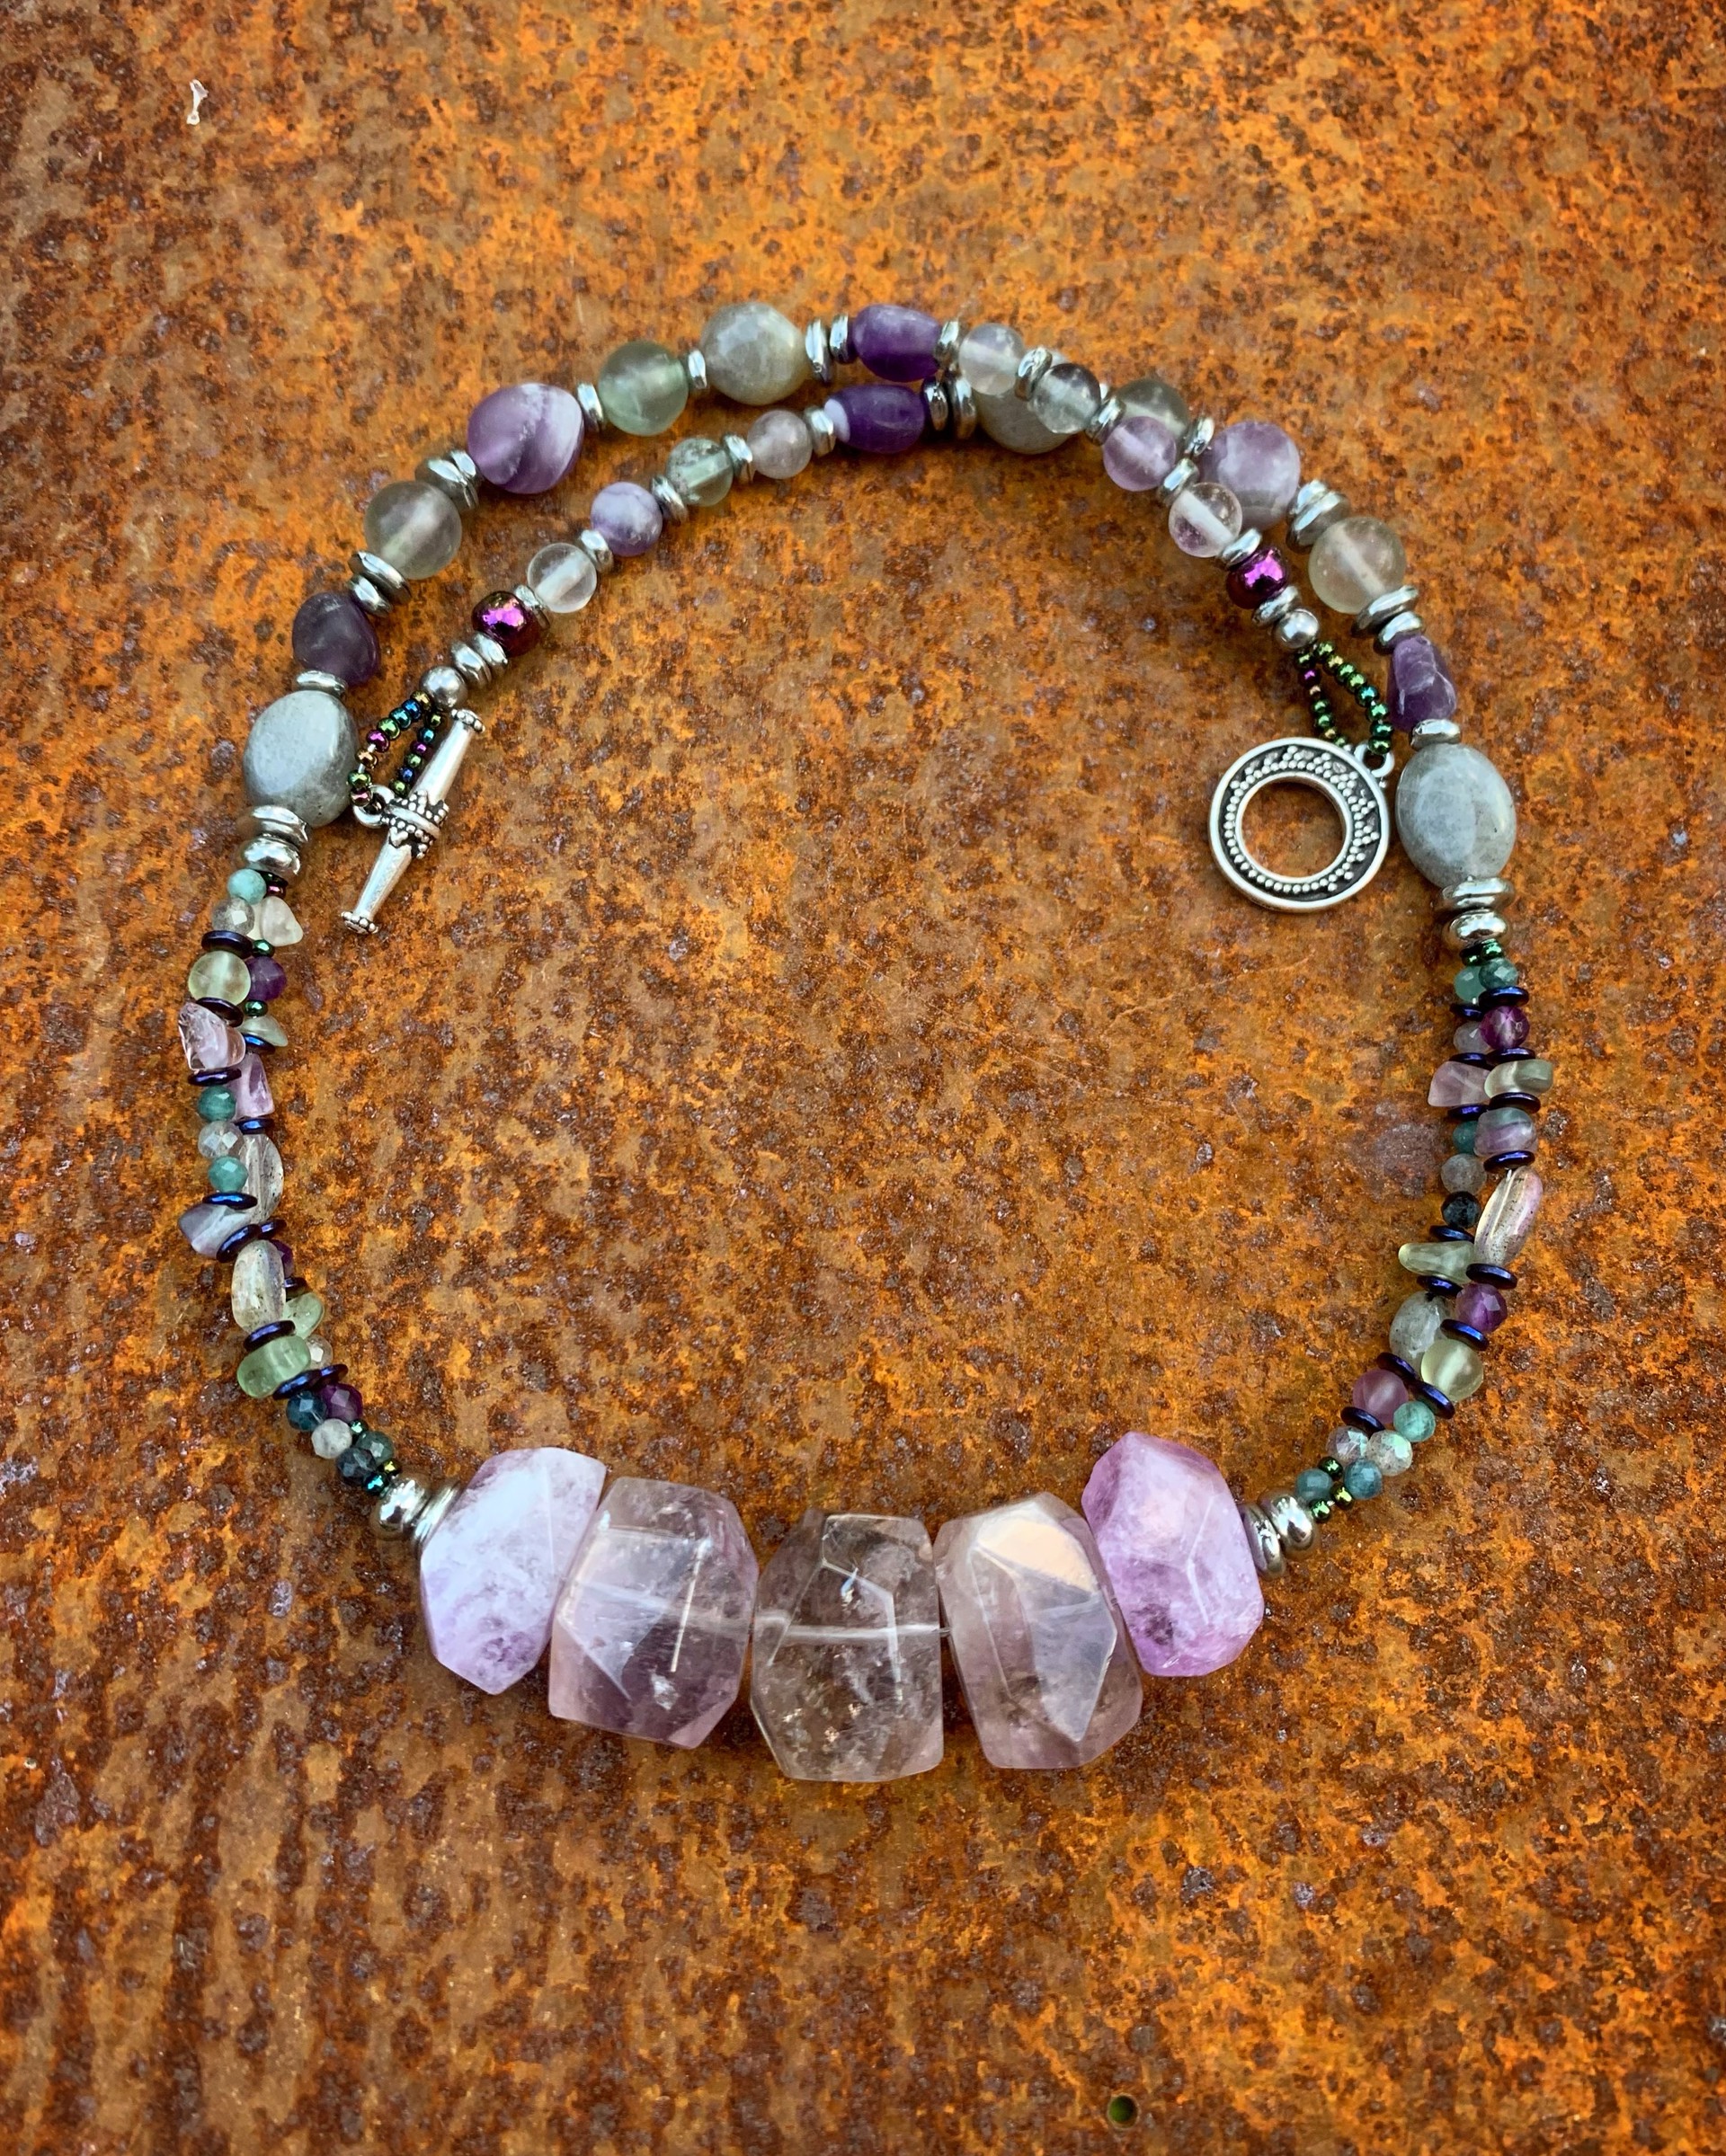 K611 Amethyst and Fluorite Necklace. by Kelly Ormsby